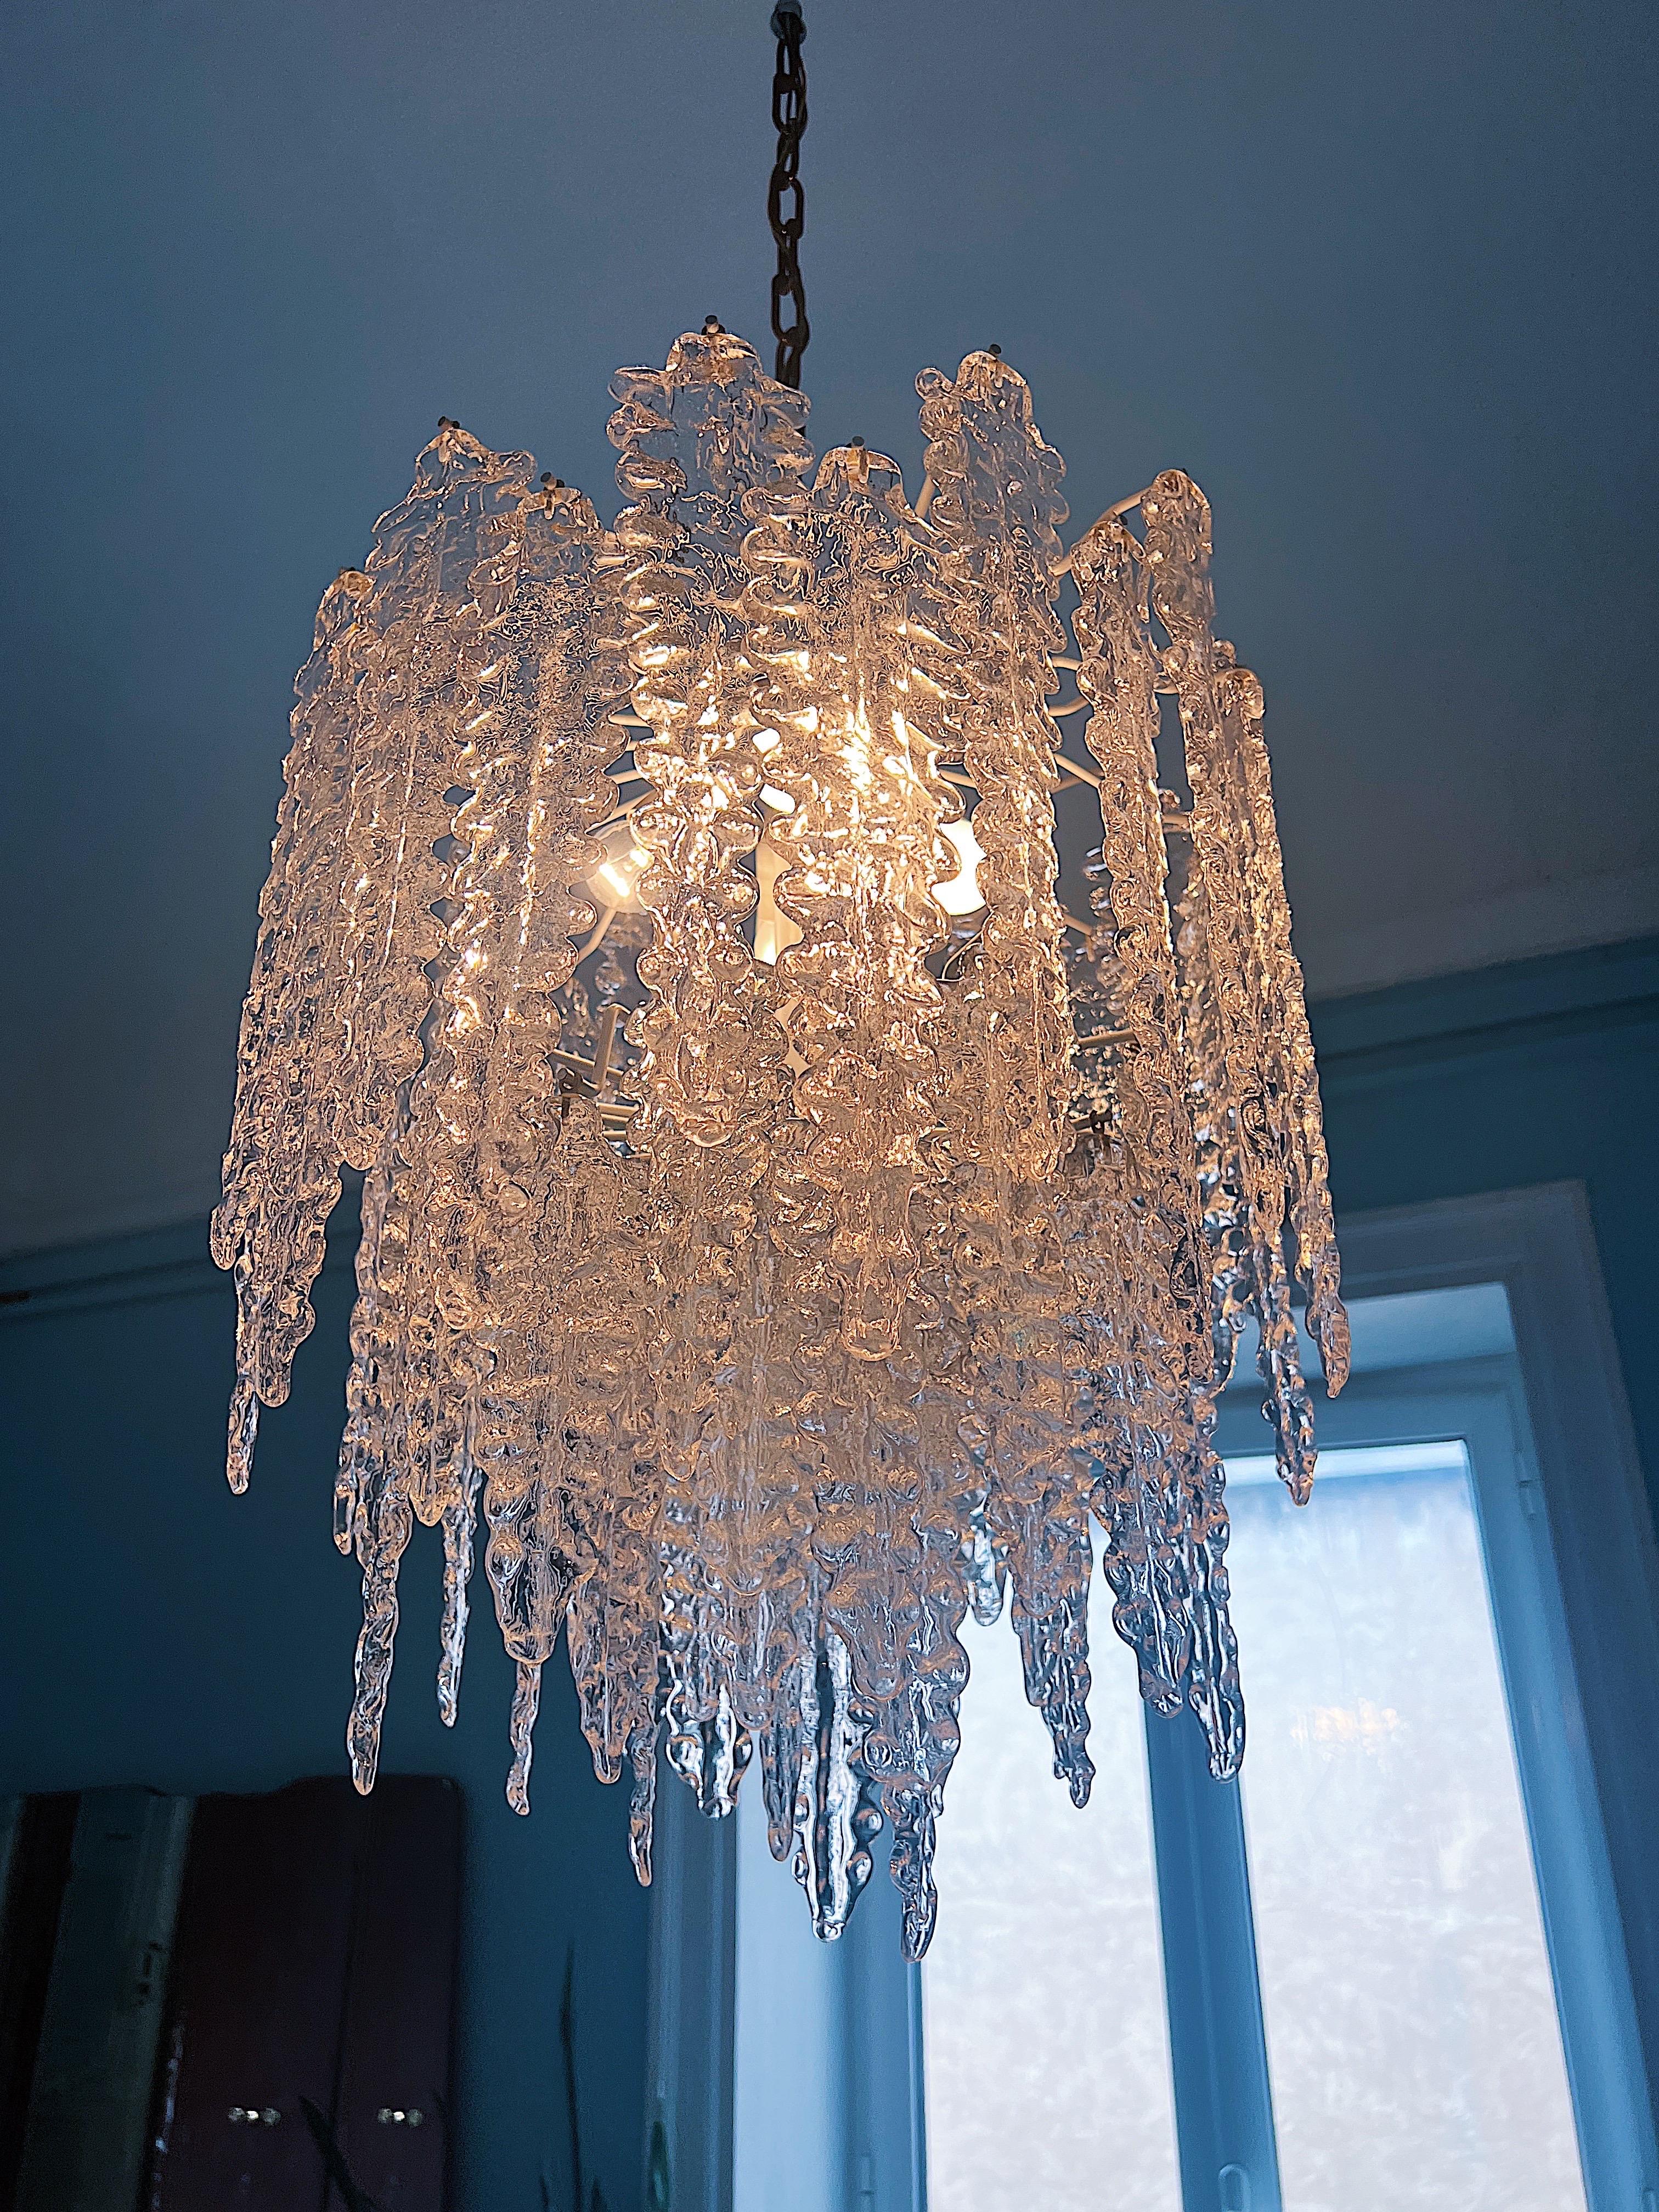 Midcentury Chandelier by Venini, 1960s from the Alga Series For Sale 1